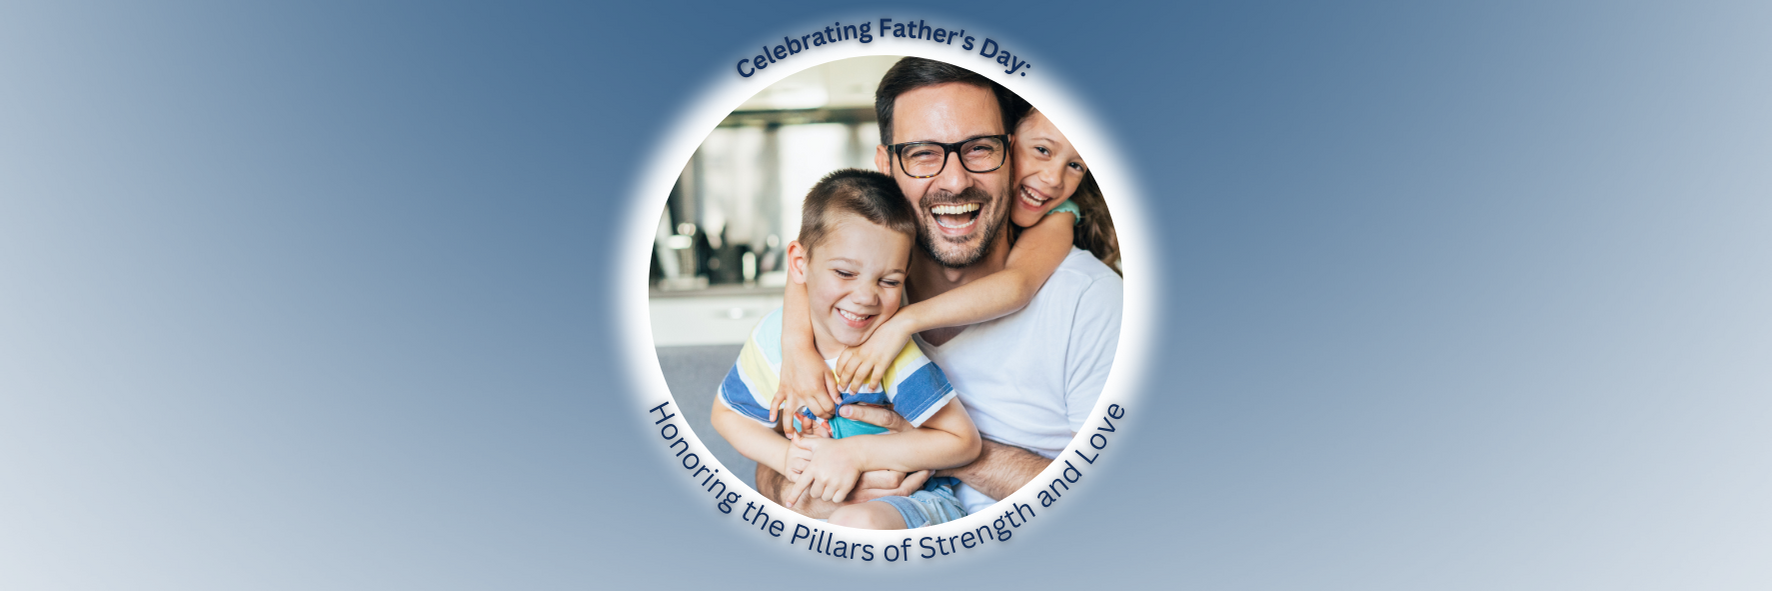 On Father's Day, let's celebrate the special men in our lives and express gratitude for their unwavering support and love. Join us in honoring fathers, stepfathers, grandfathers, and father figures who have made a profound impact. Discover heartfelt ways to make this day memorable and show appreciation for the pillars of strength in our lives. Happy Father's Day!